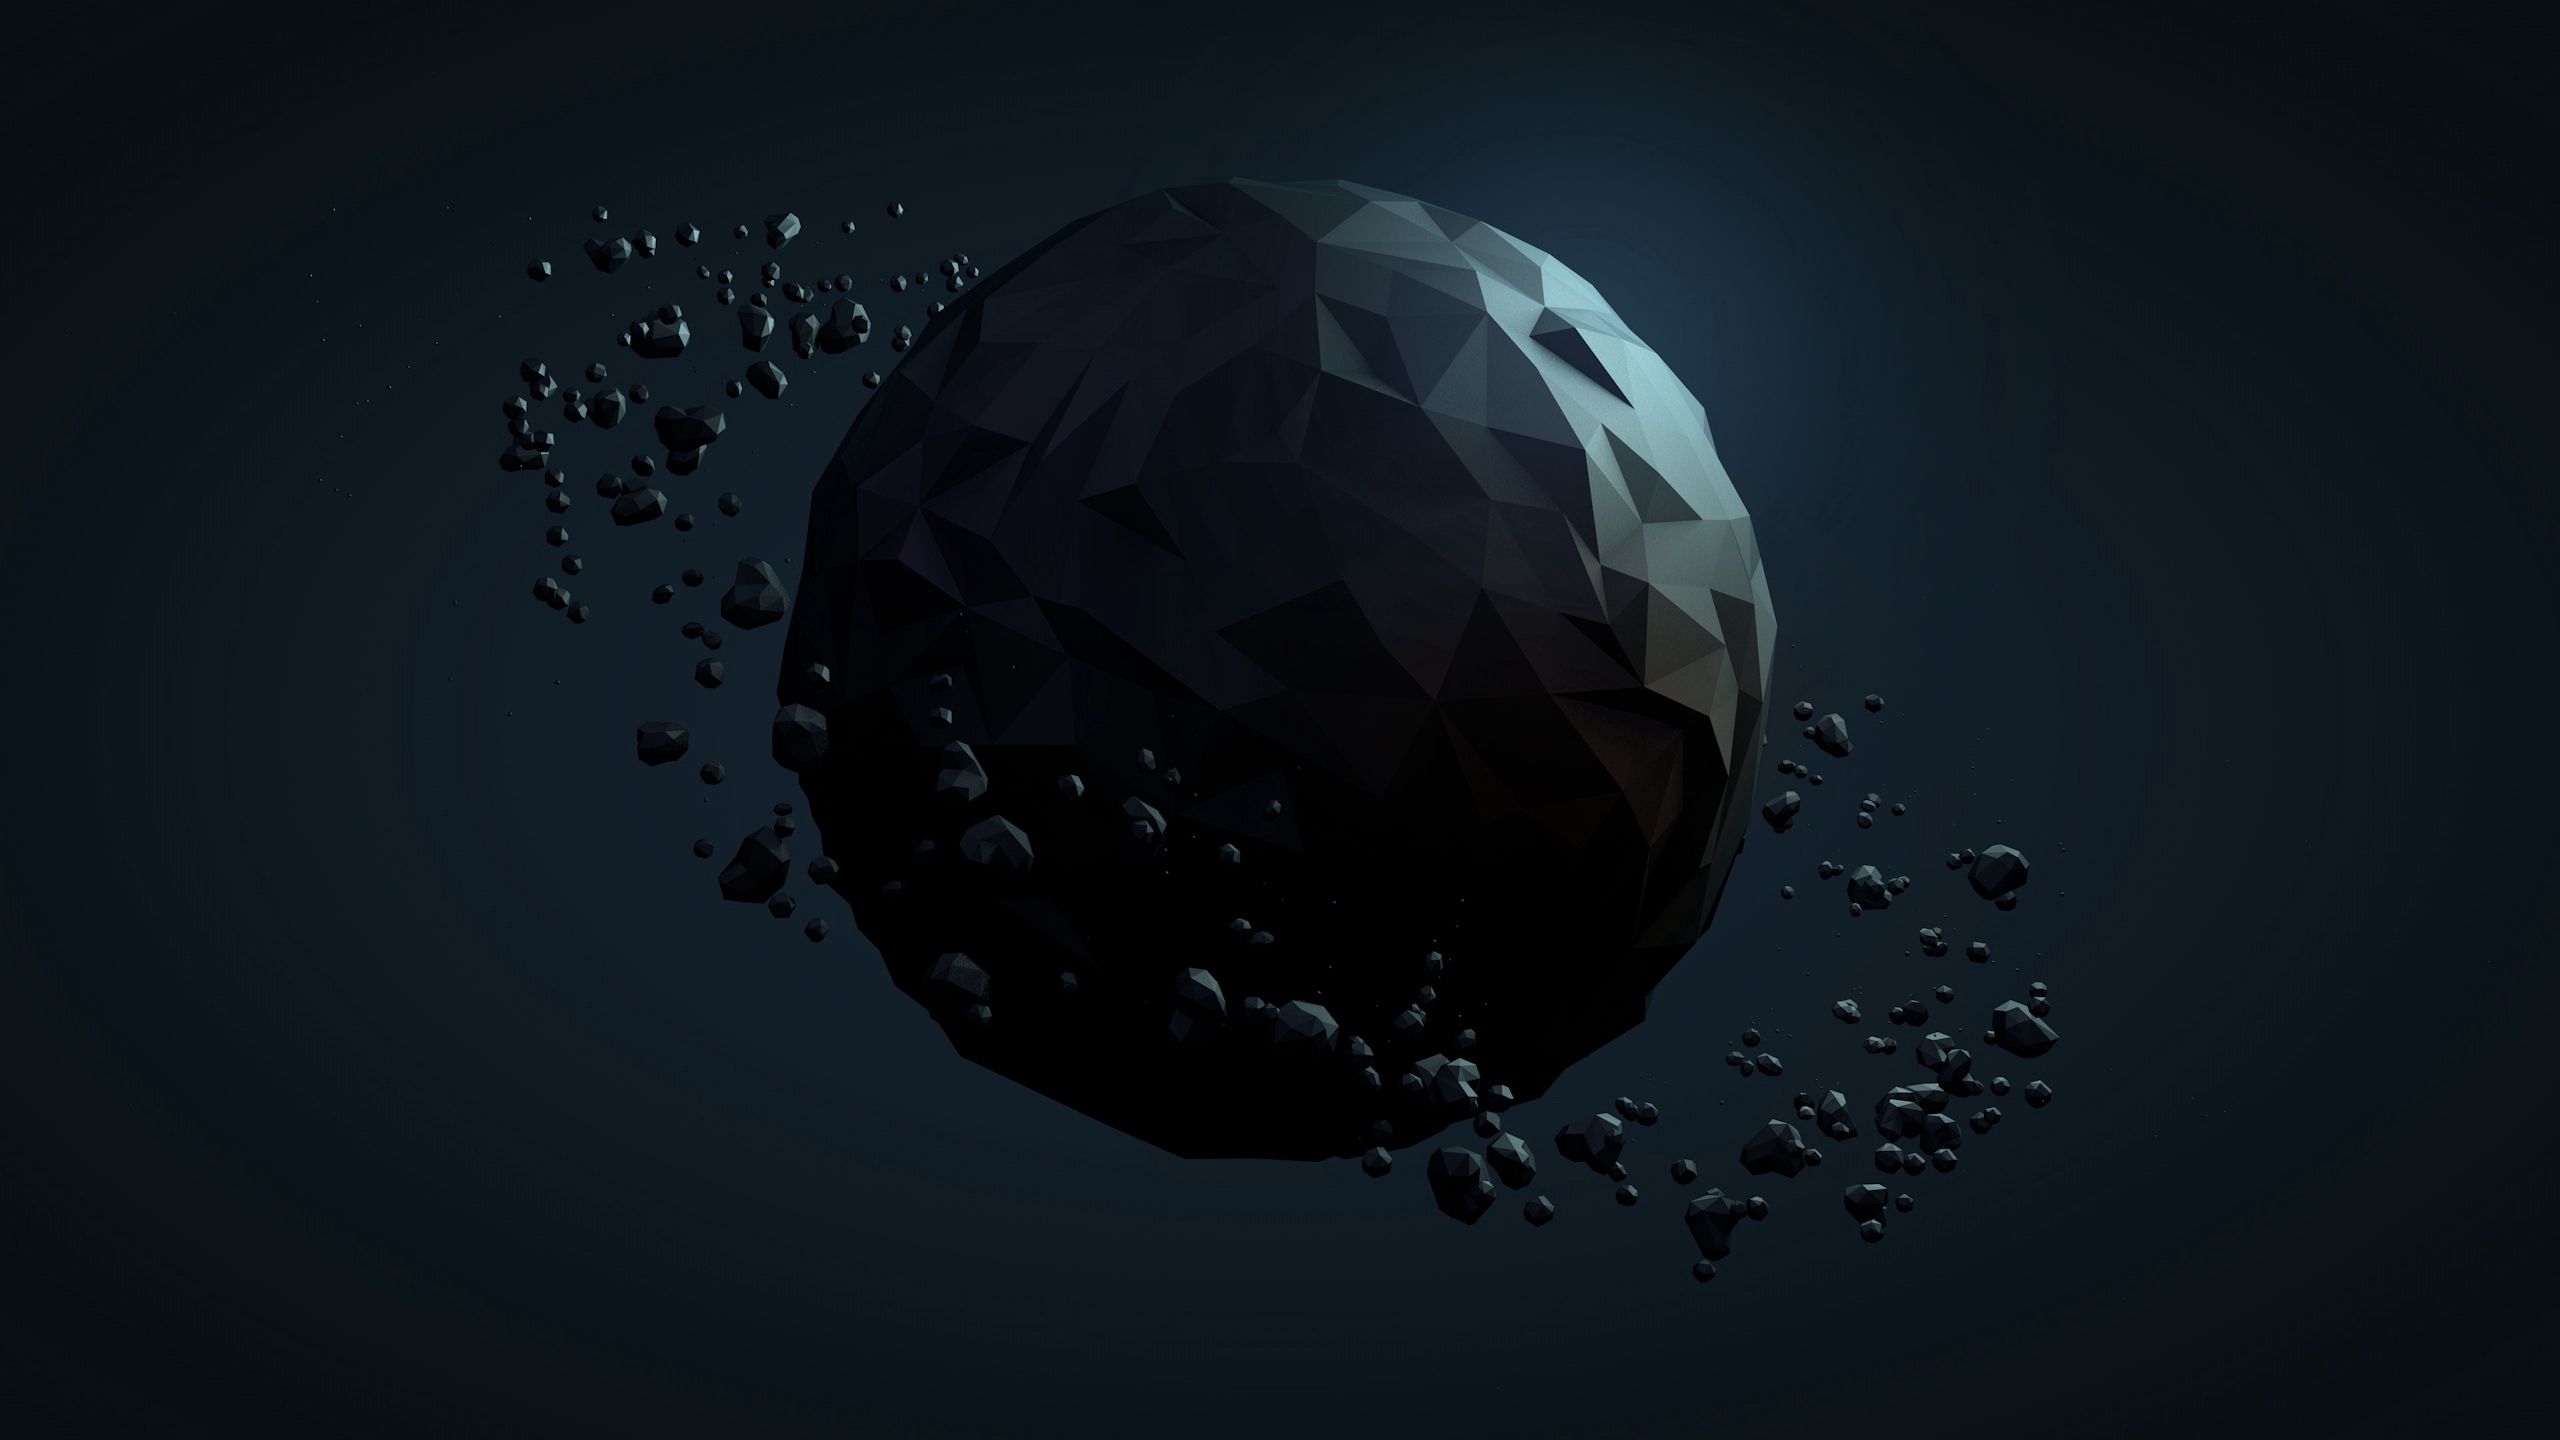 planet, dark, abstract, background, ball